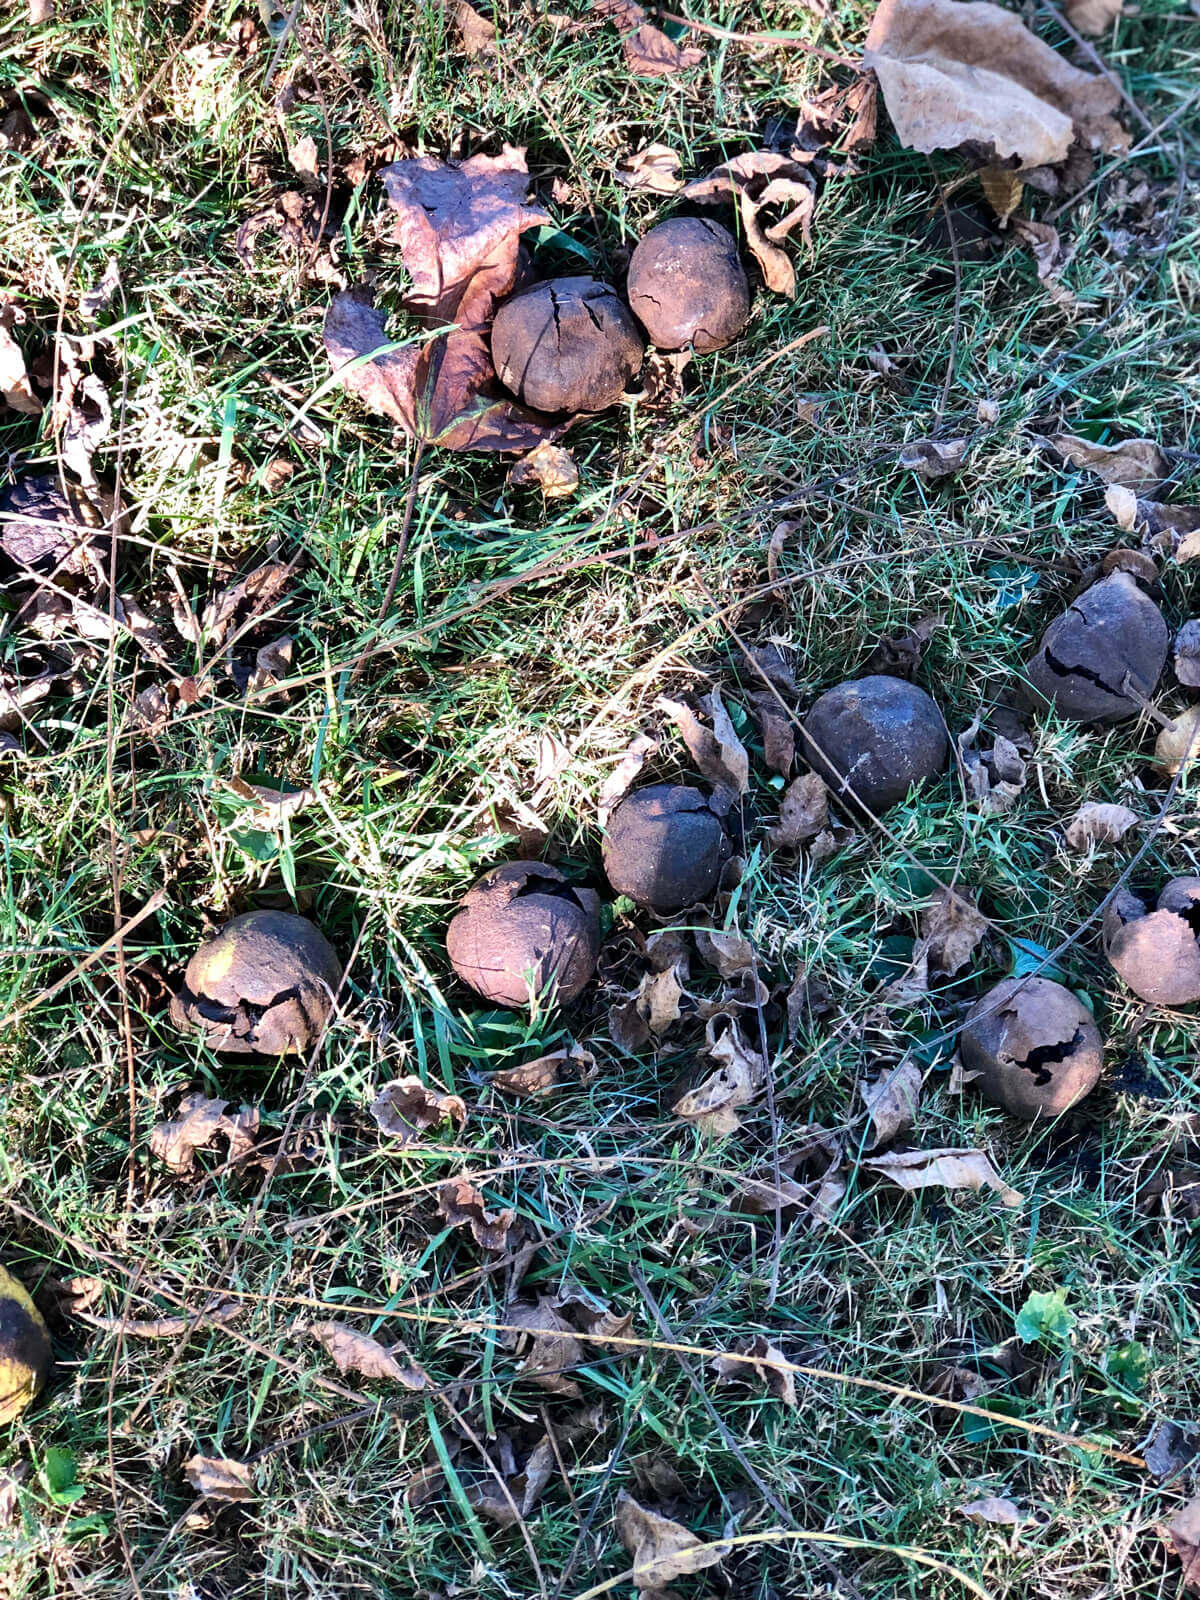 Image of black walnuts on the ground in Wythe County, Virginia